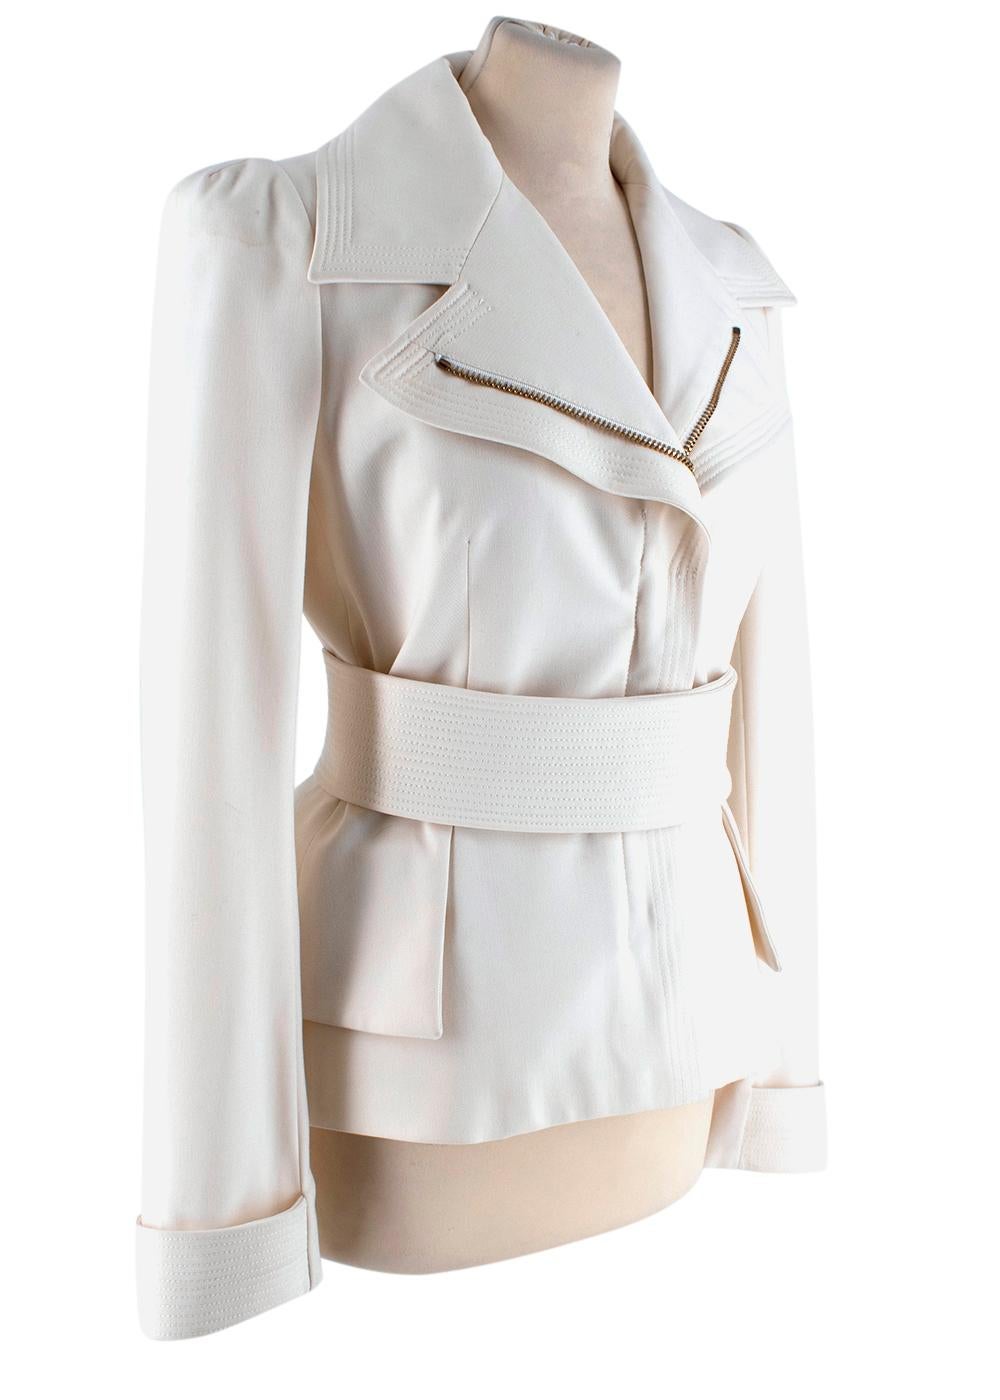 Tom Ford Cream Belted Jacket

- Gold zip and press stud fastening
- Thick band at sleeves 
- Thick cross over tie at waist with gold hook fastening
- Adjustable buckle at back of neck 
- Shoulder pads

Materials:
Outer
52% Polyester
43% Wool
5%